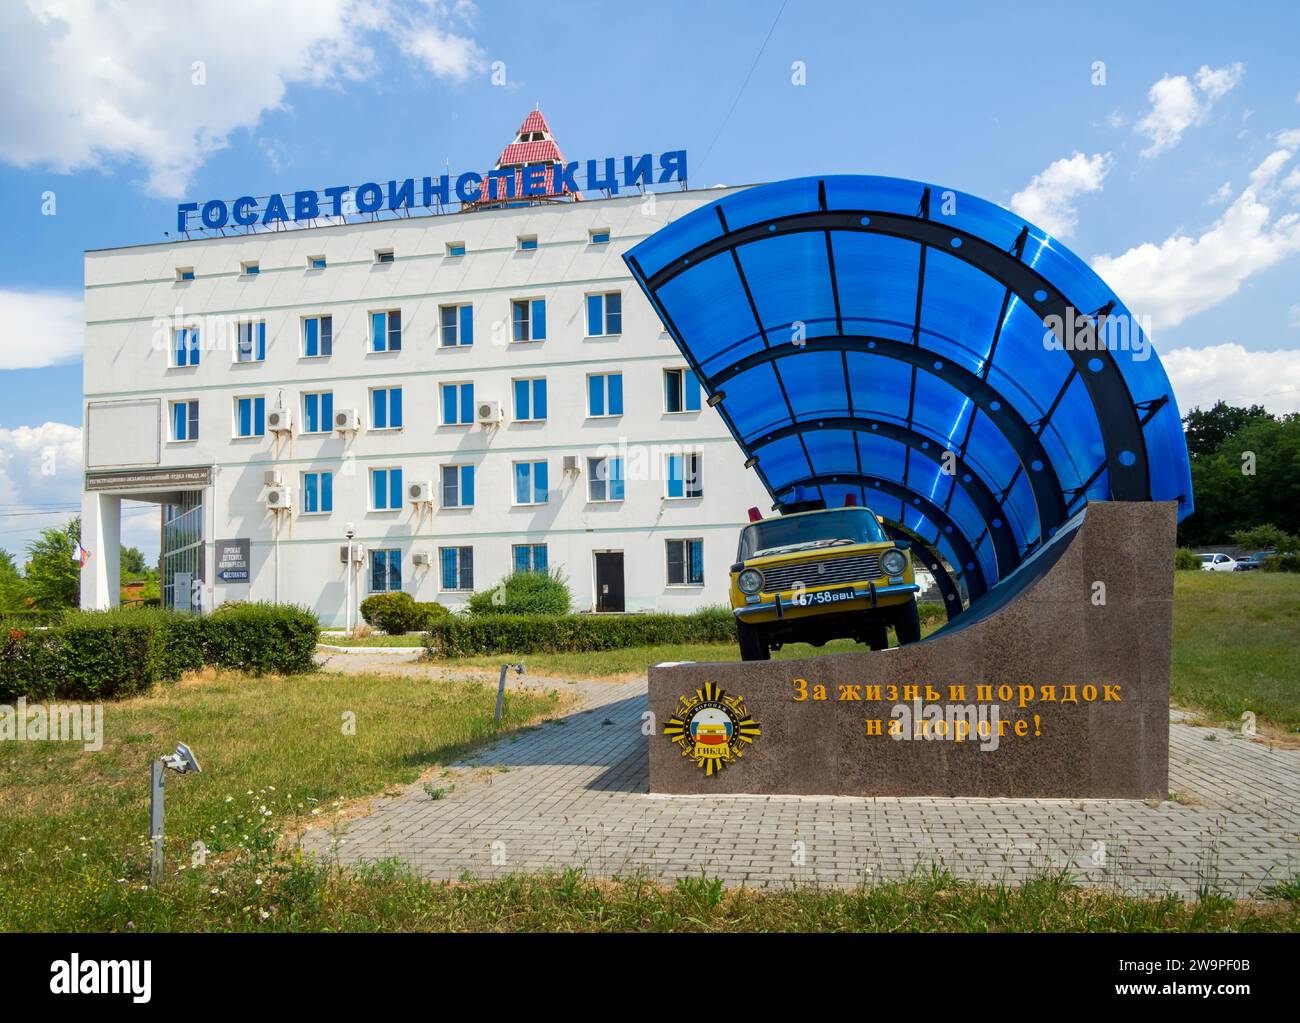 Voronezh, Russia - July 05, 2022: Retro car of the traffic police of the USSR GAI and the building of the traffic police on Kholmistoy street, Voronez Stock Photo